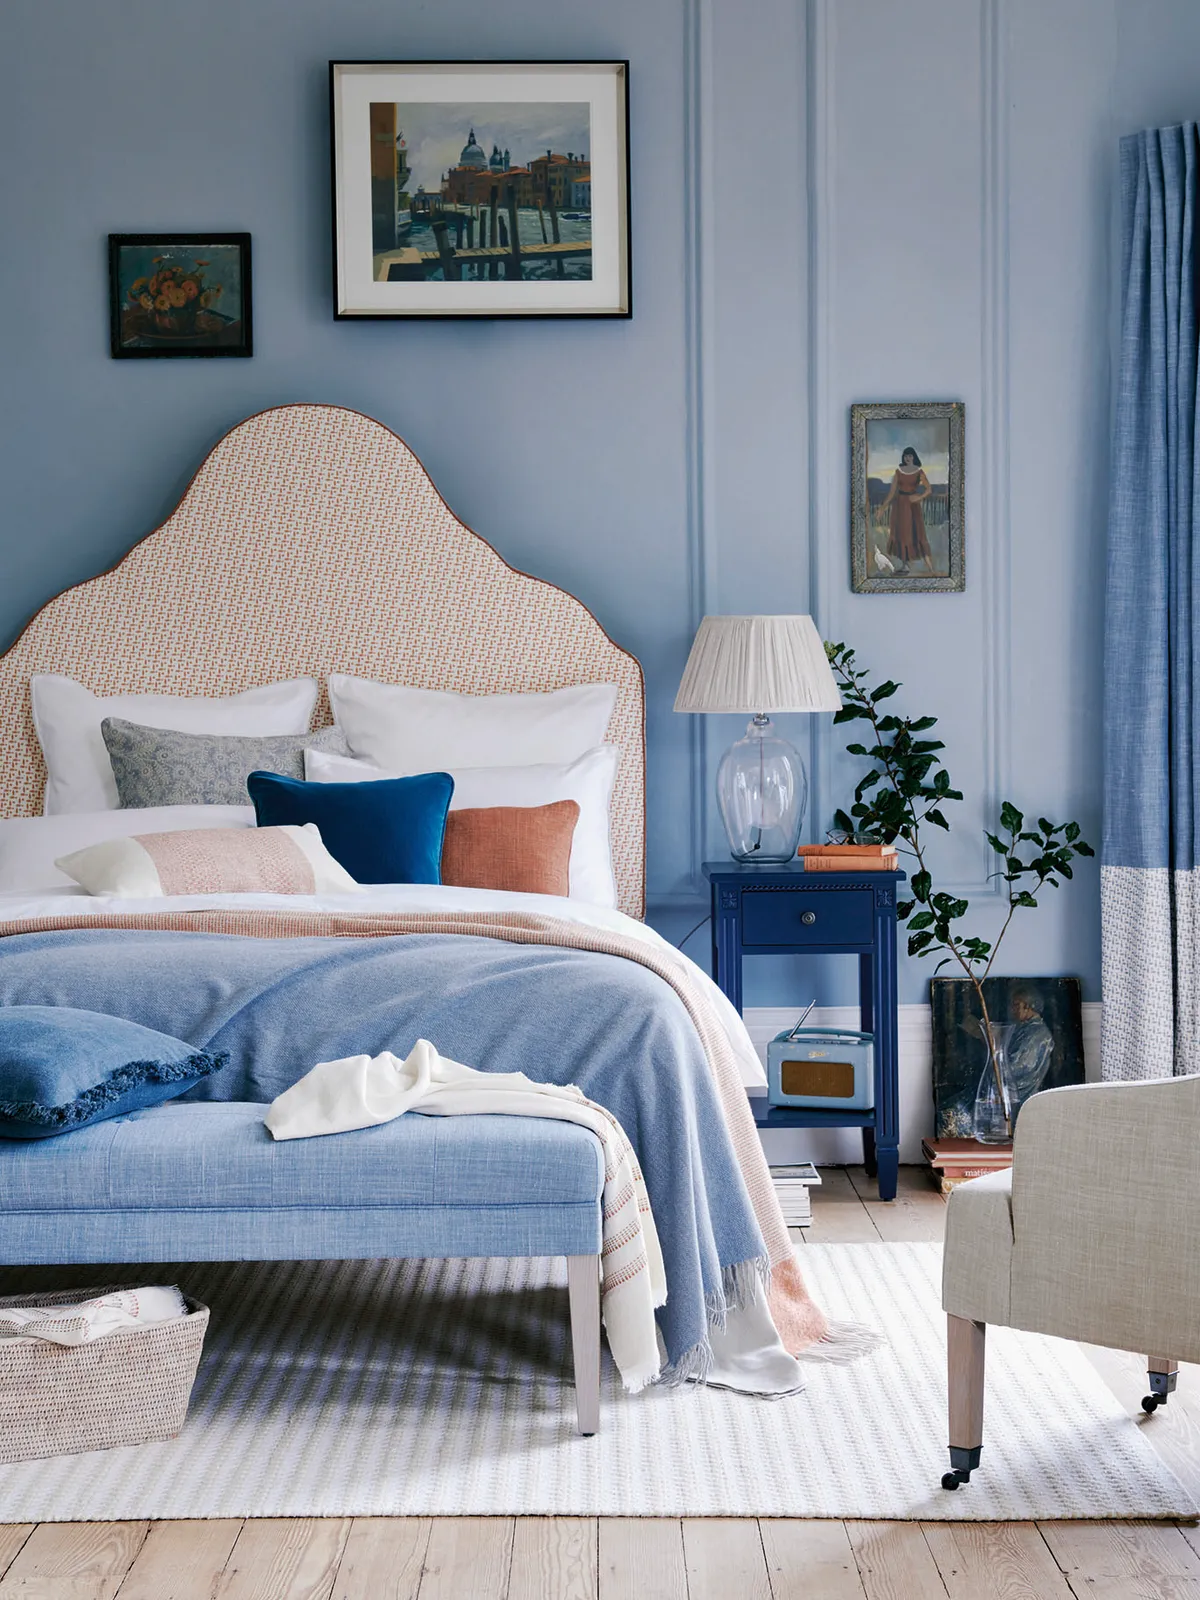 a headboard in a warm colour will make a blue room less cold. Clemmie headboard, from £370, Neptune.